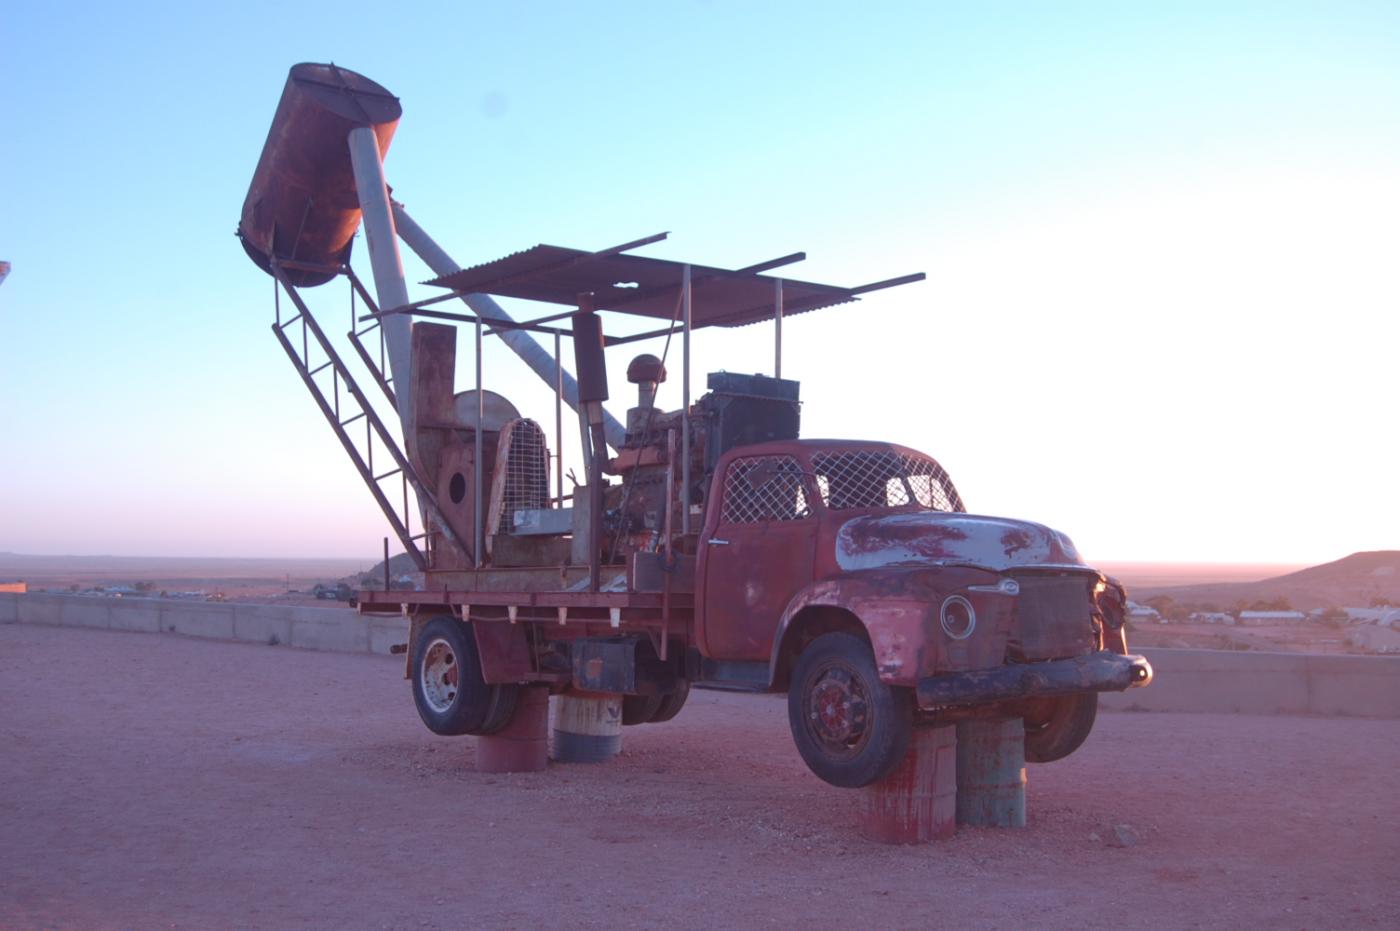 One of Coober Pedy&#039;s iconic mining vehicle is lit by the light of the rising desert sun.